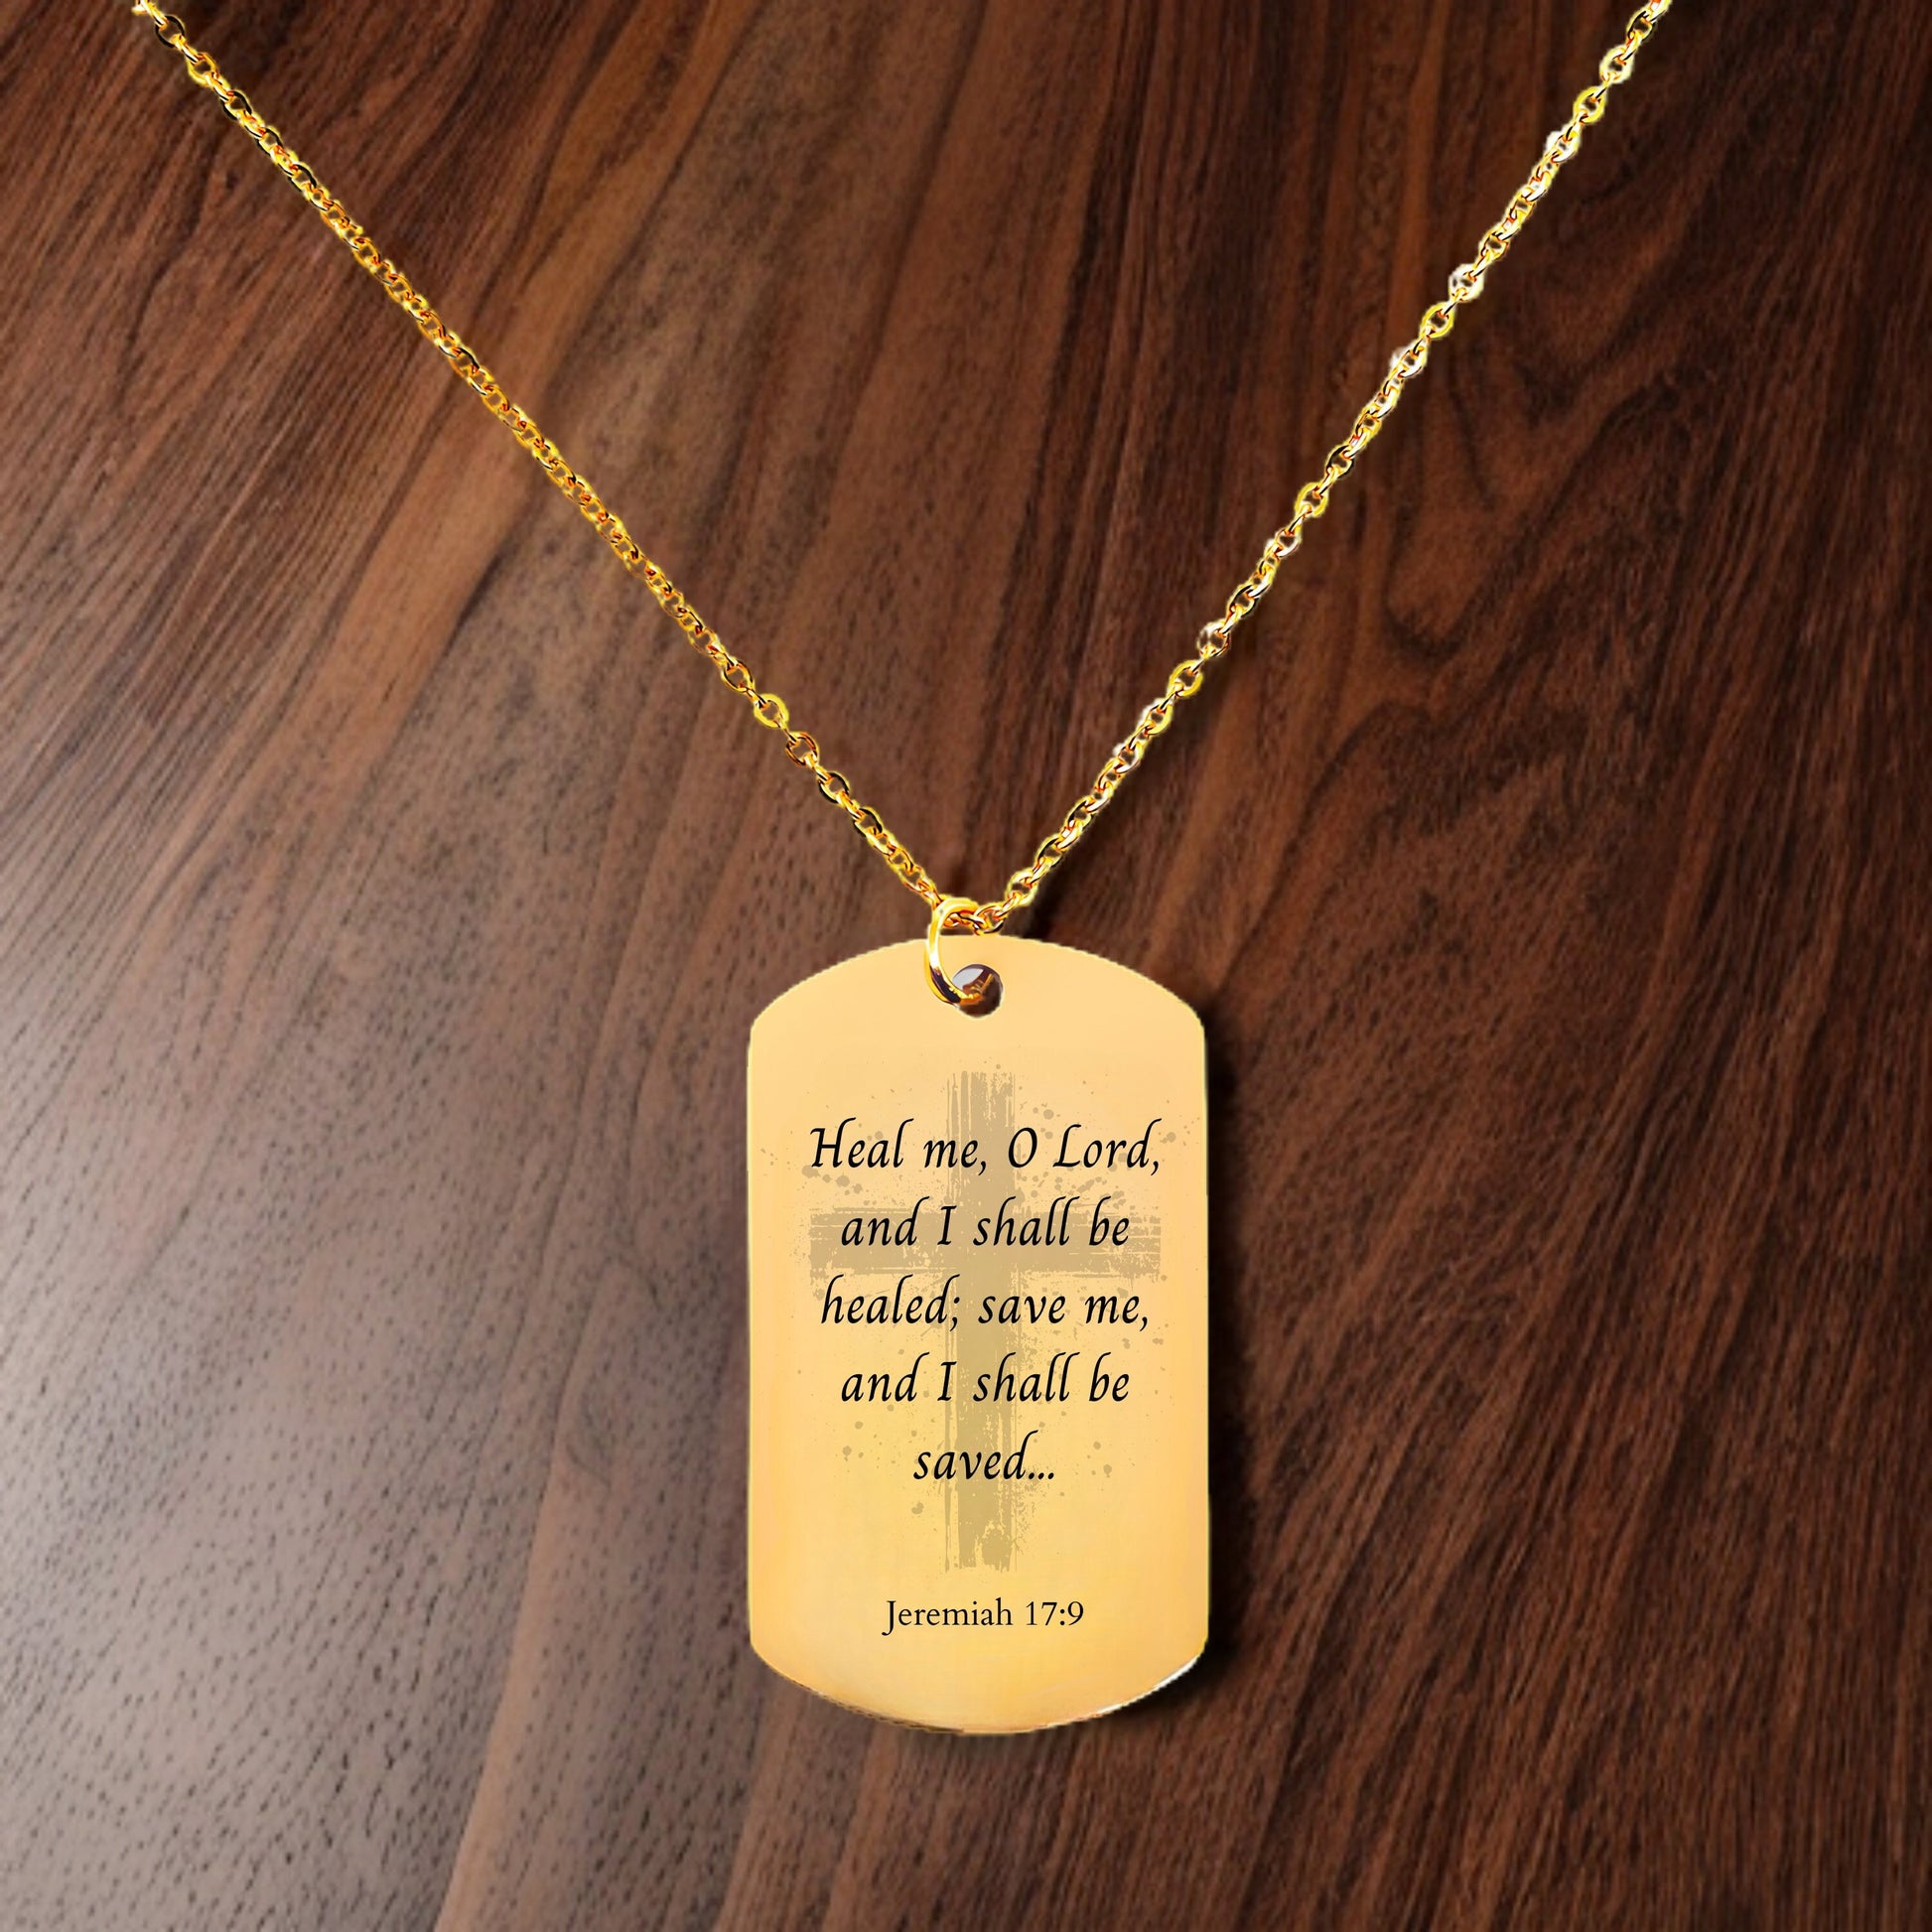 Jeremiah 9 17 quote necklace, gold bible verse, 14k gold cross charm necklace, confirmation gift, gold bar tag necklace,religious scripture